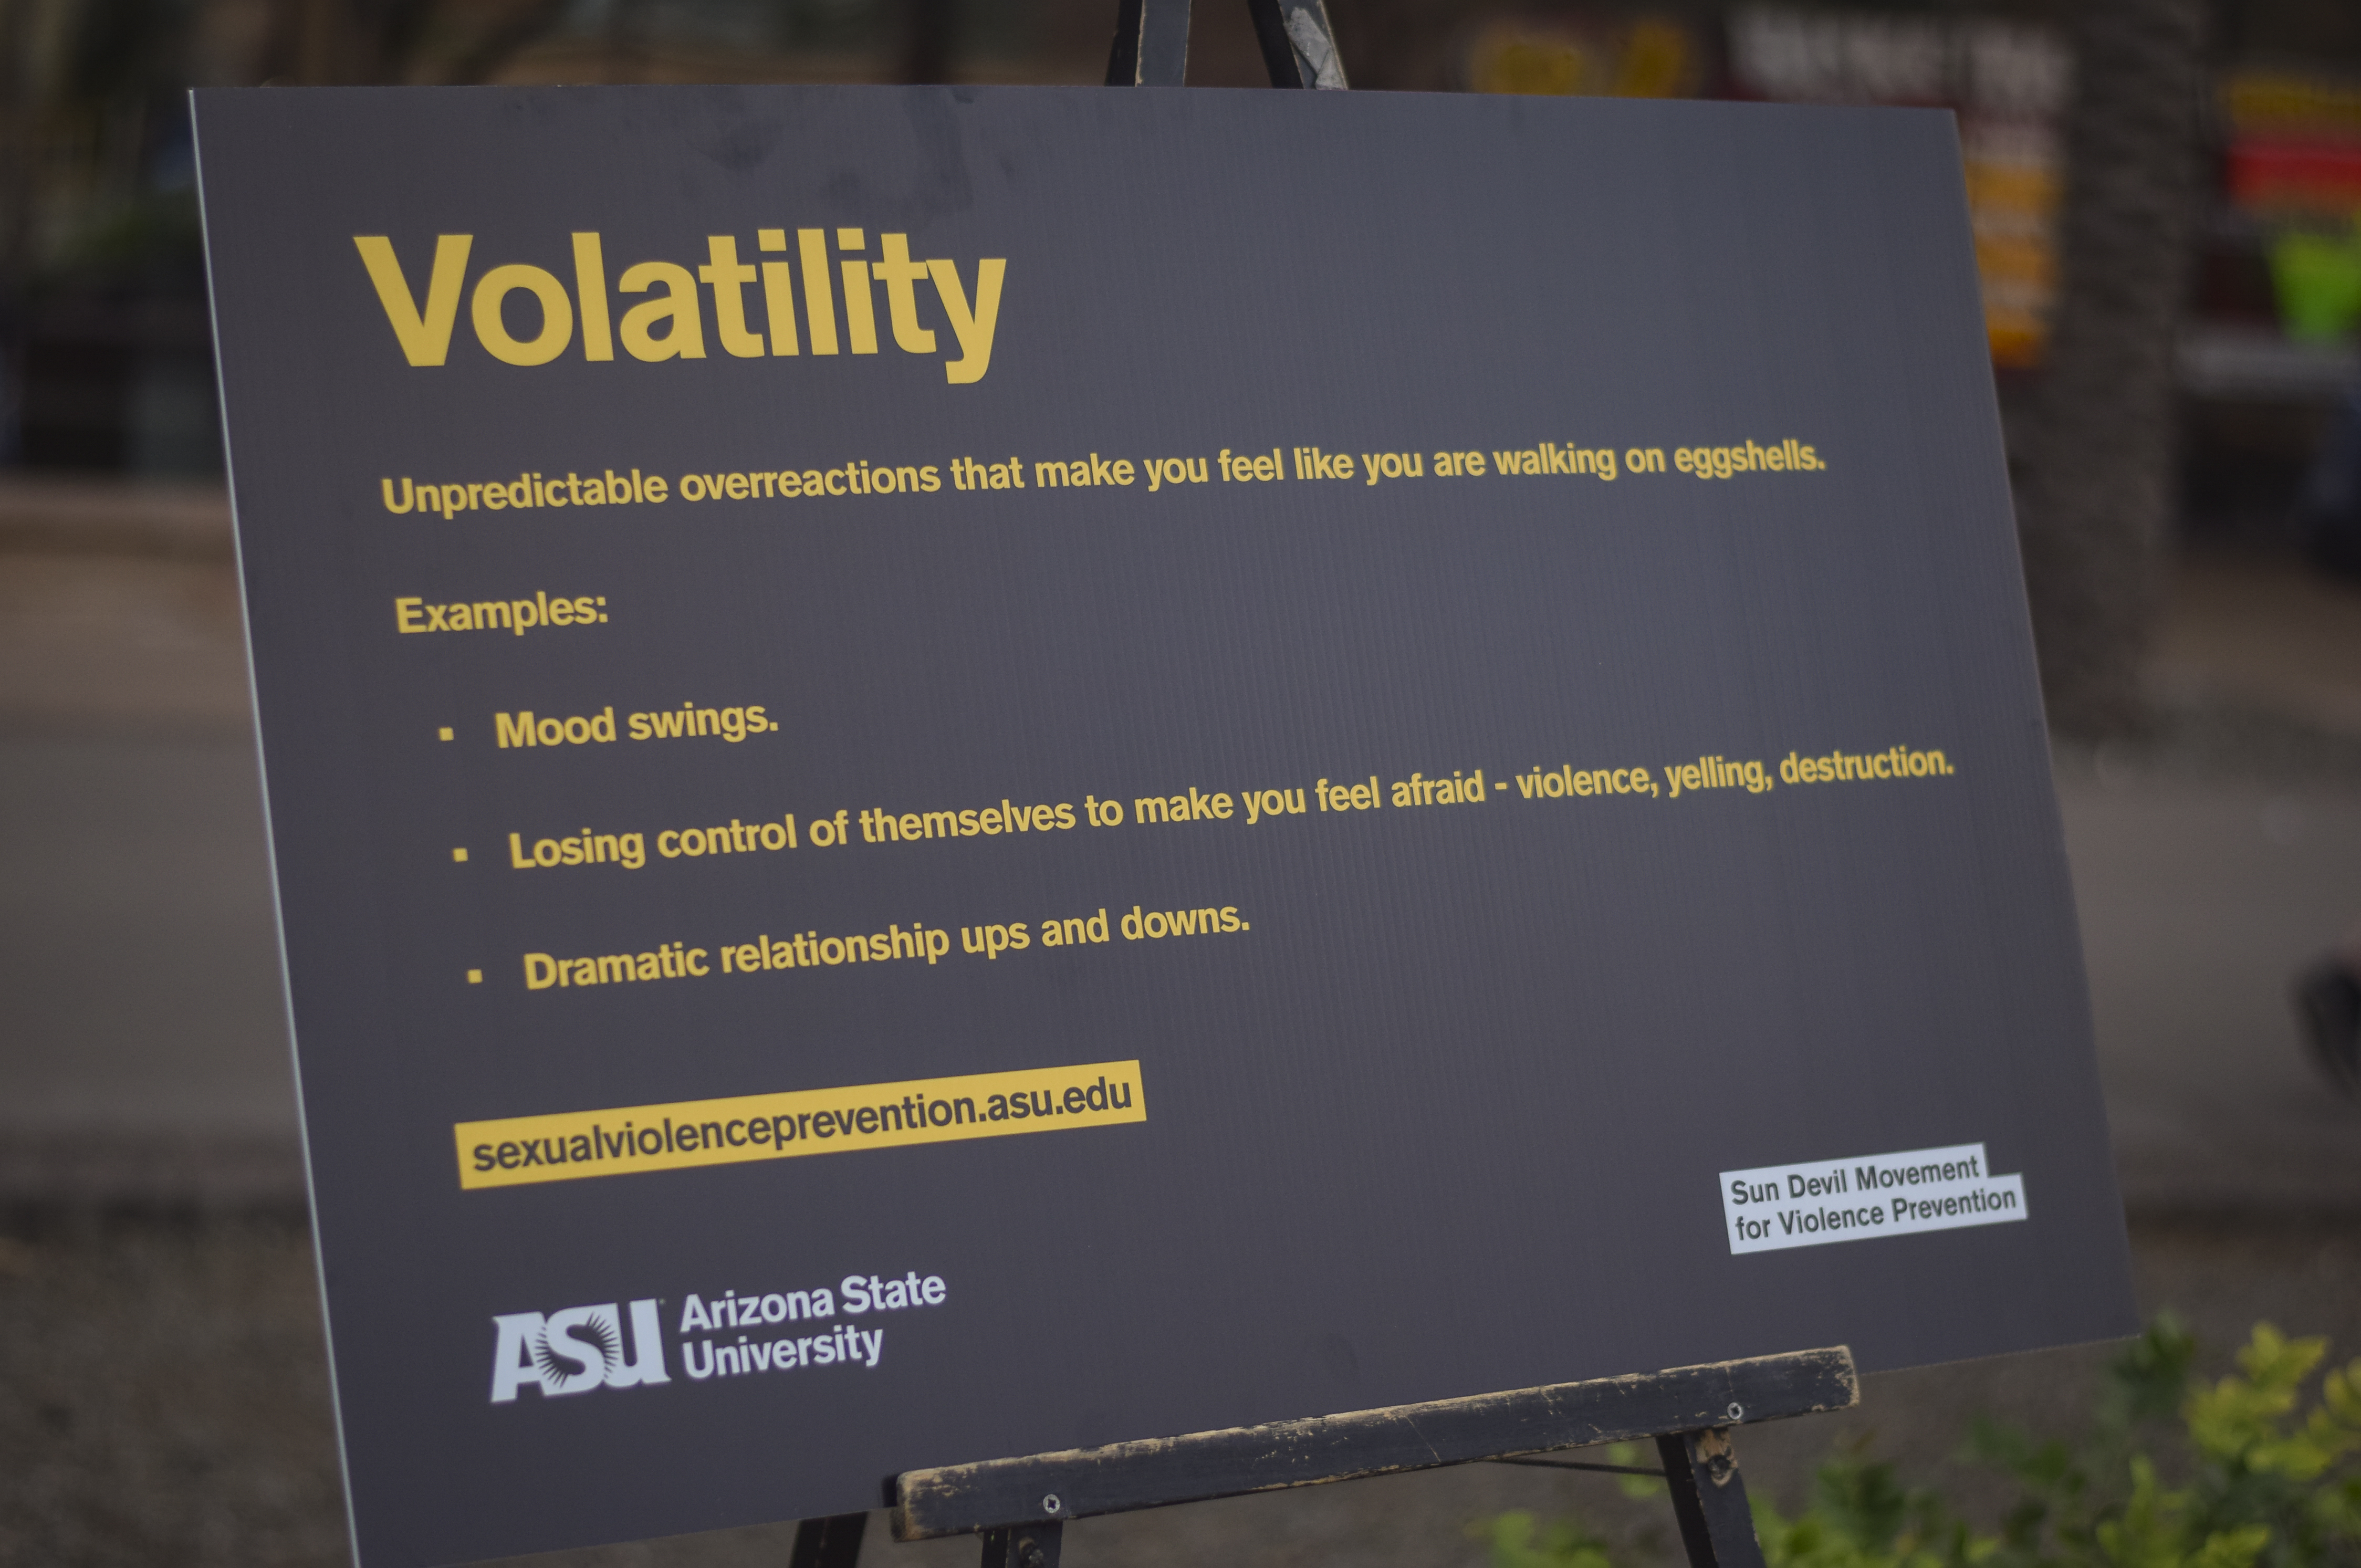 Sign on "Volatility" from last years event for Sexual and Relationship Violence Prevention Program. 